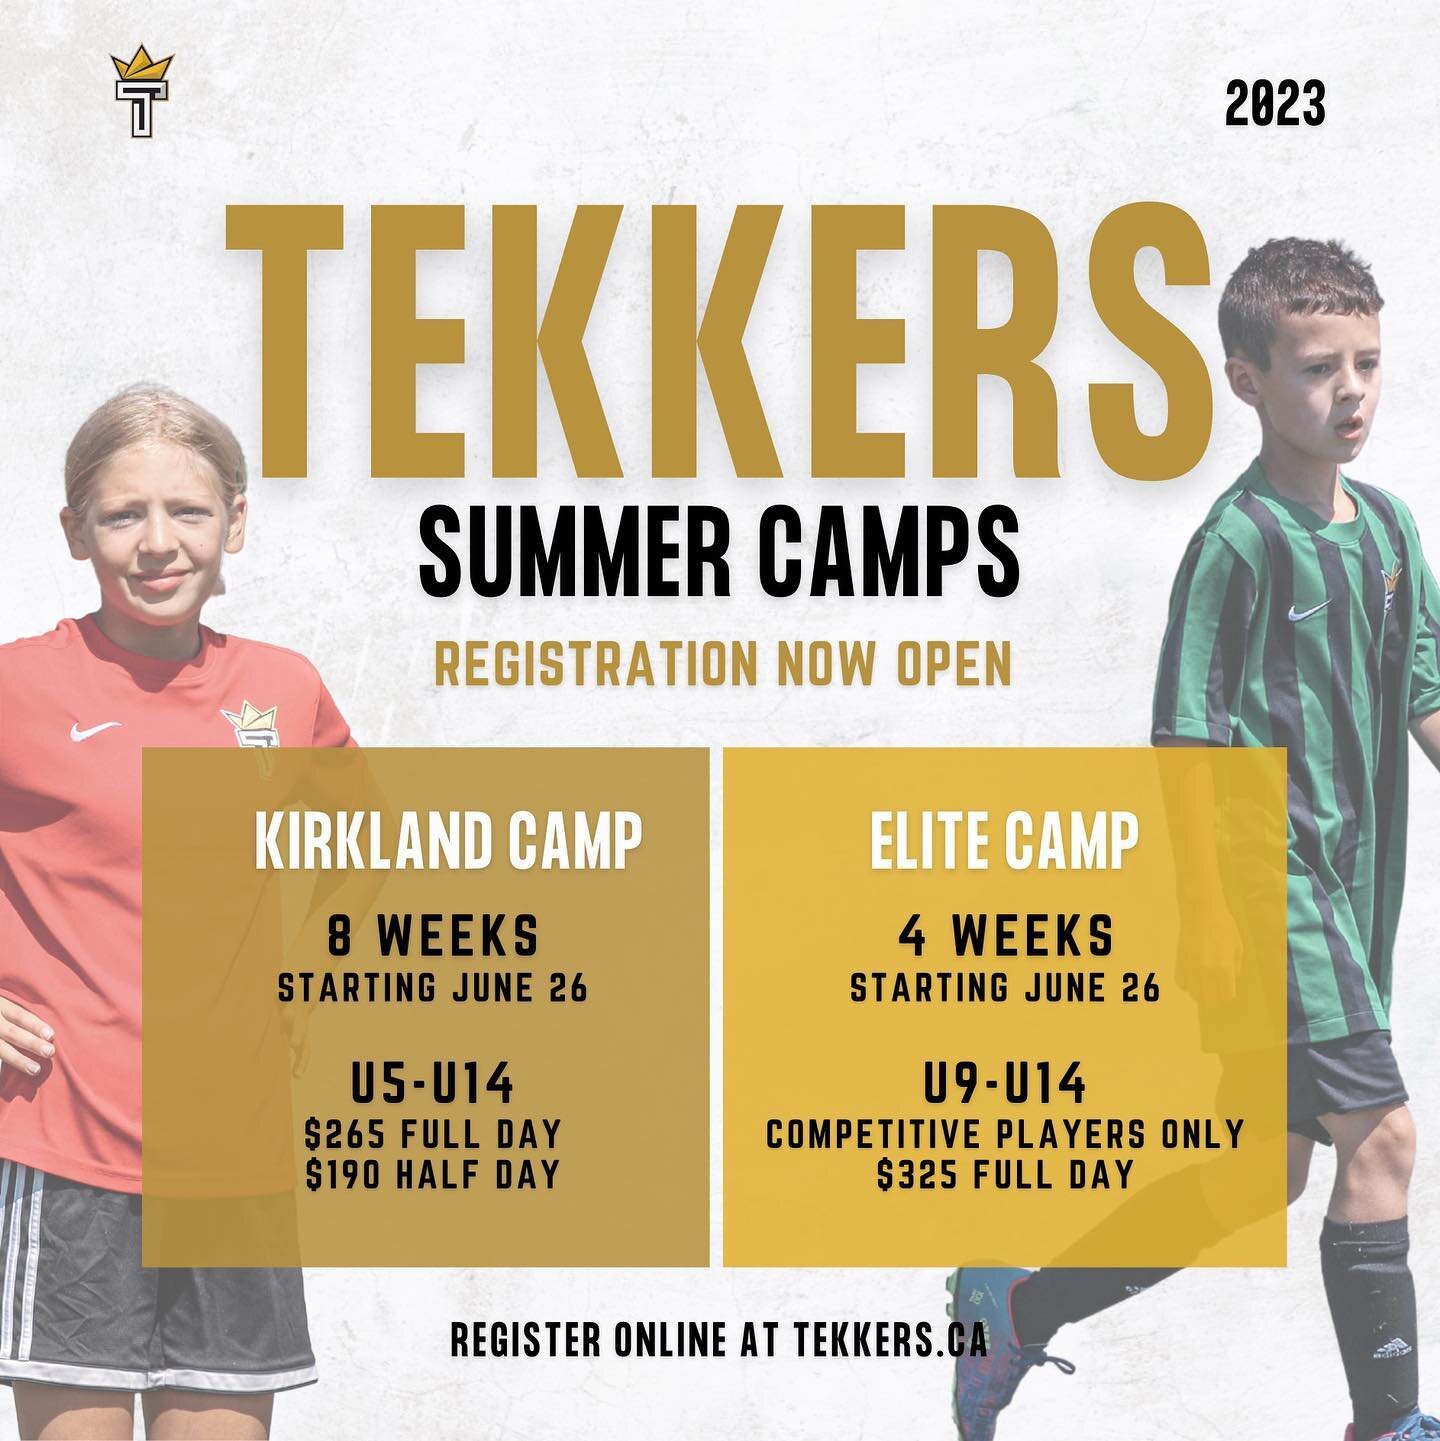 NOW OPEN: 2023 Kirkland &amp; elite summer camp registration. Sign up now at the link in our bio. 

+ stay tuned for more camp announcements coming soon!

-

MAINTENANT OUVERT : Inscription au camp d'&eacute;t&eacute; 2023 Kirkland &amp; elite. Inscr